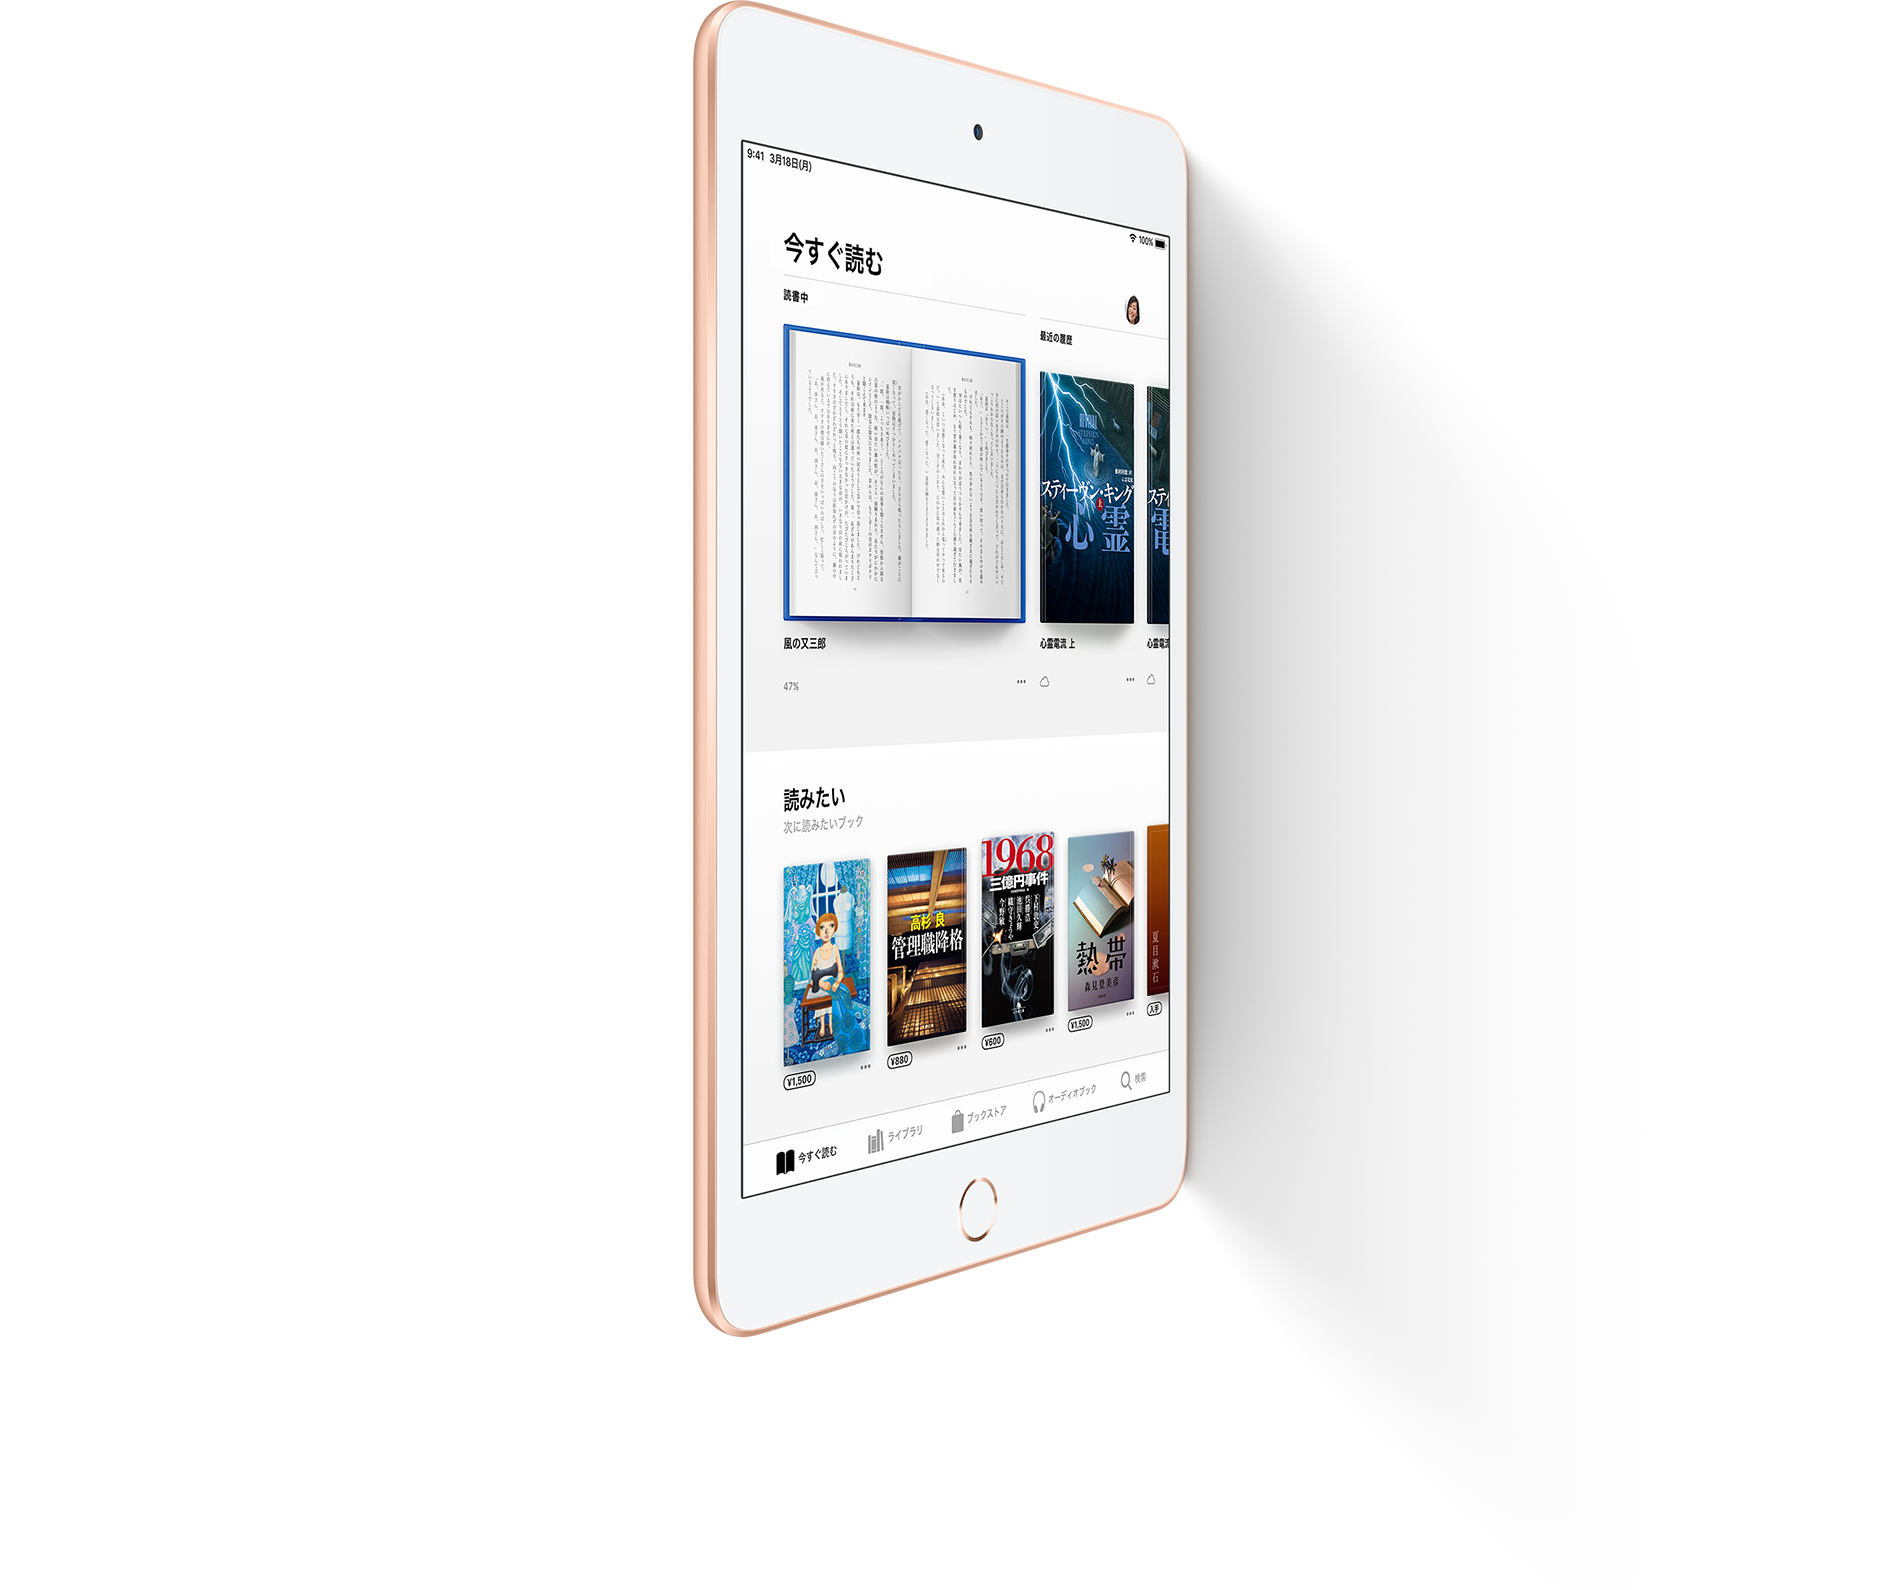 7.9-inch Retina Display Stunning color and easy reading in any light.